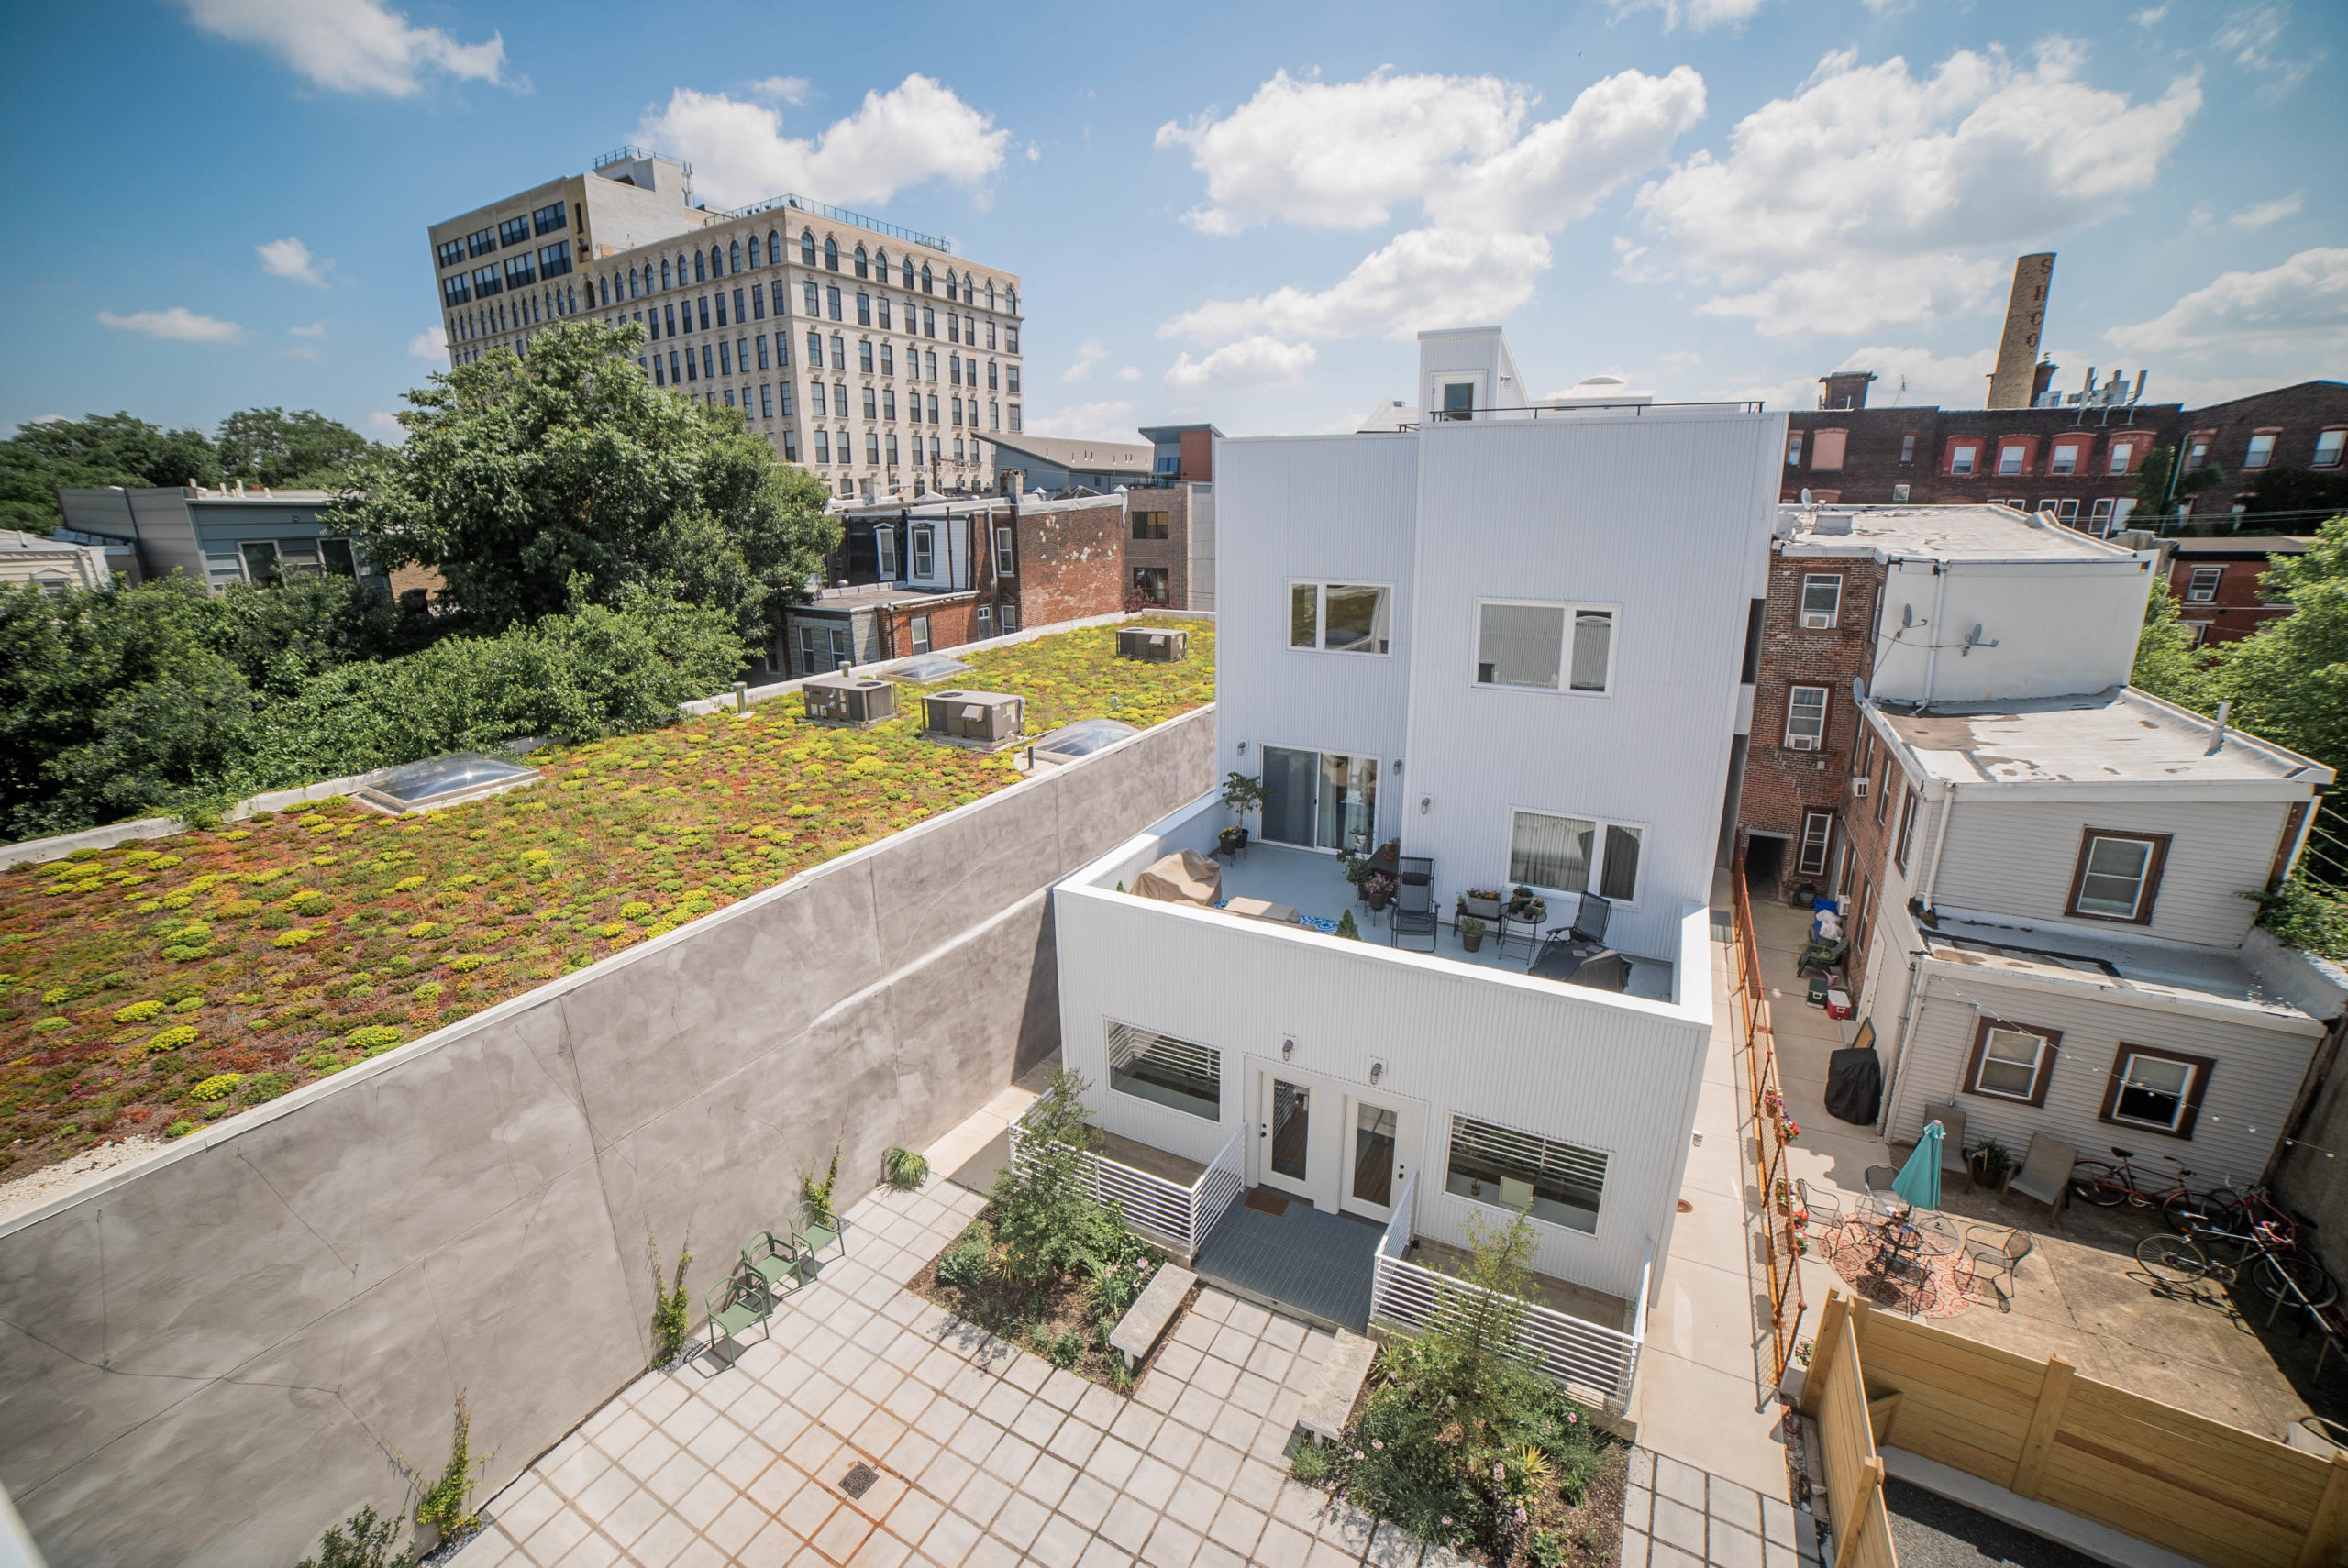 Green roof at 1330 N 5th next to Kensington Yards, Solo's most recent development project.